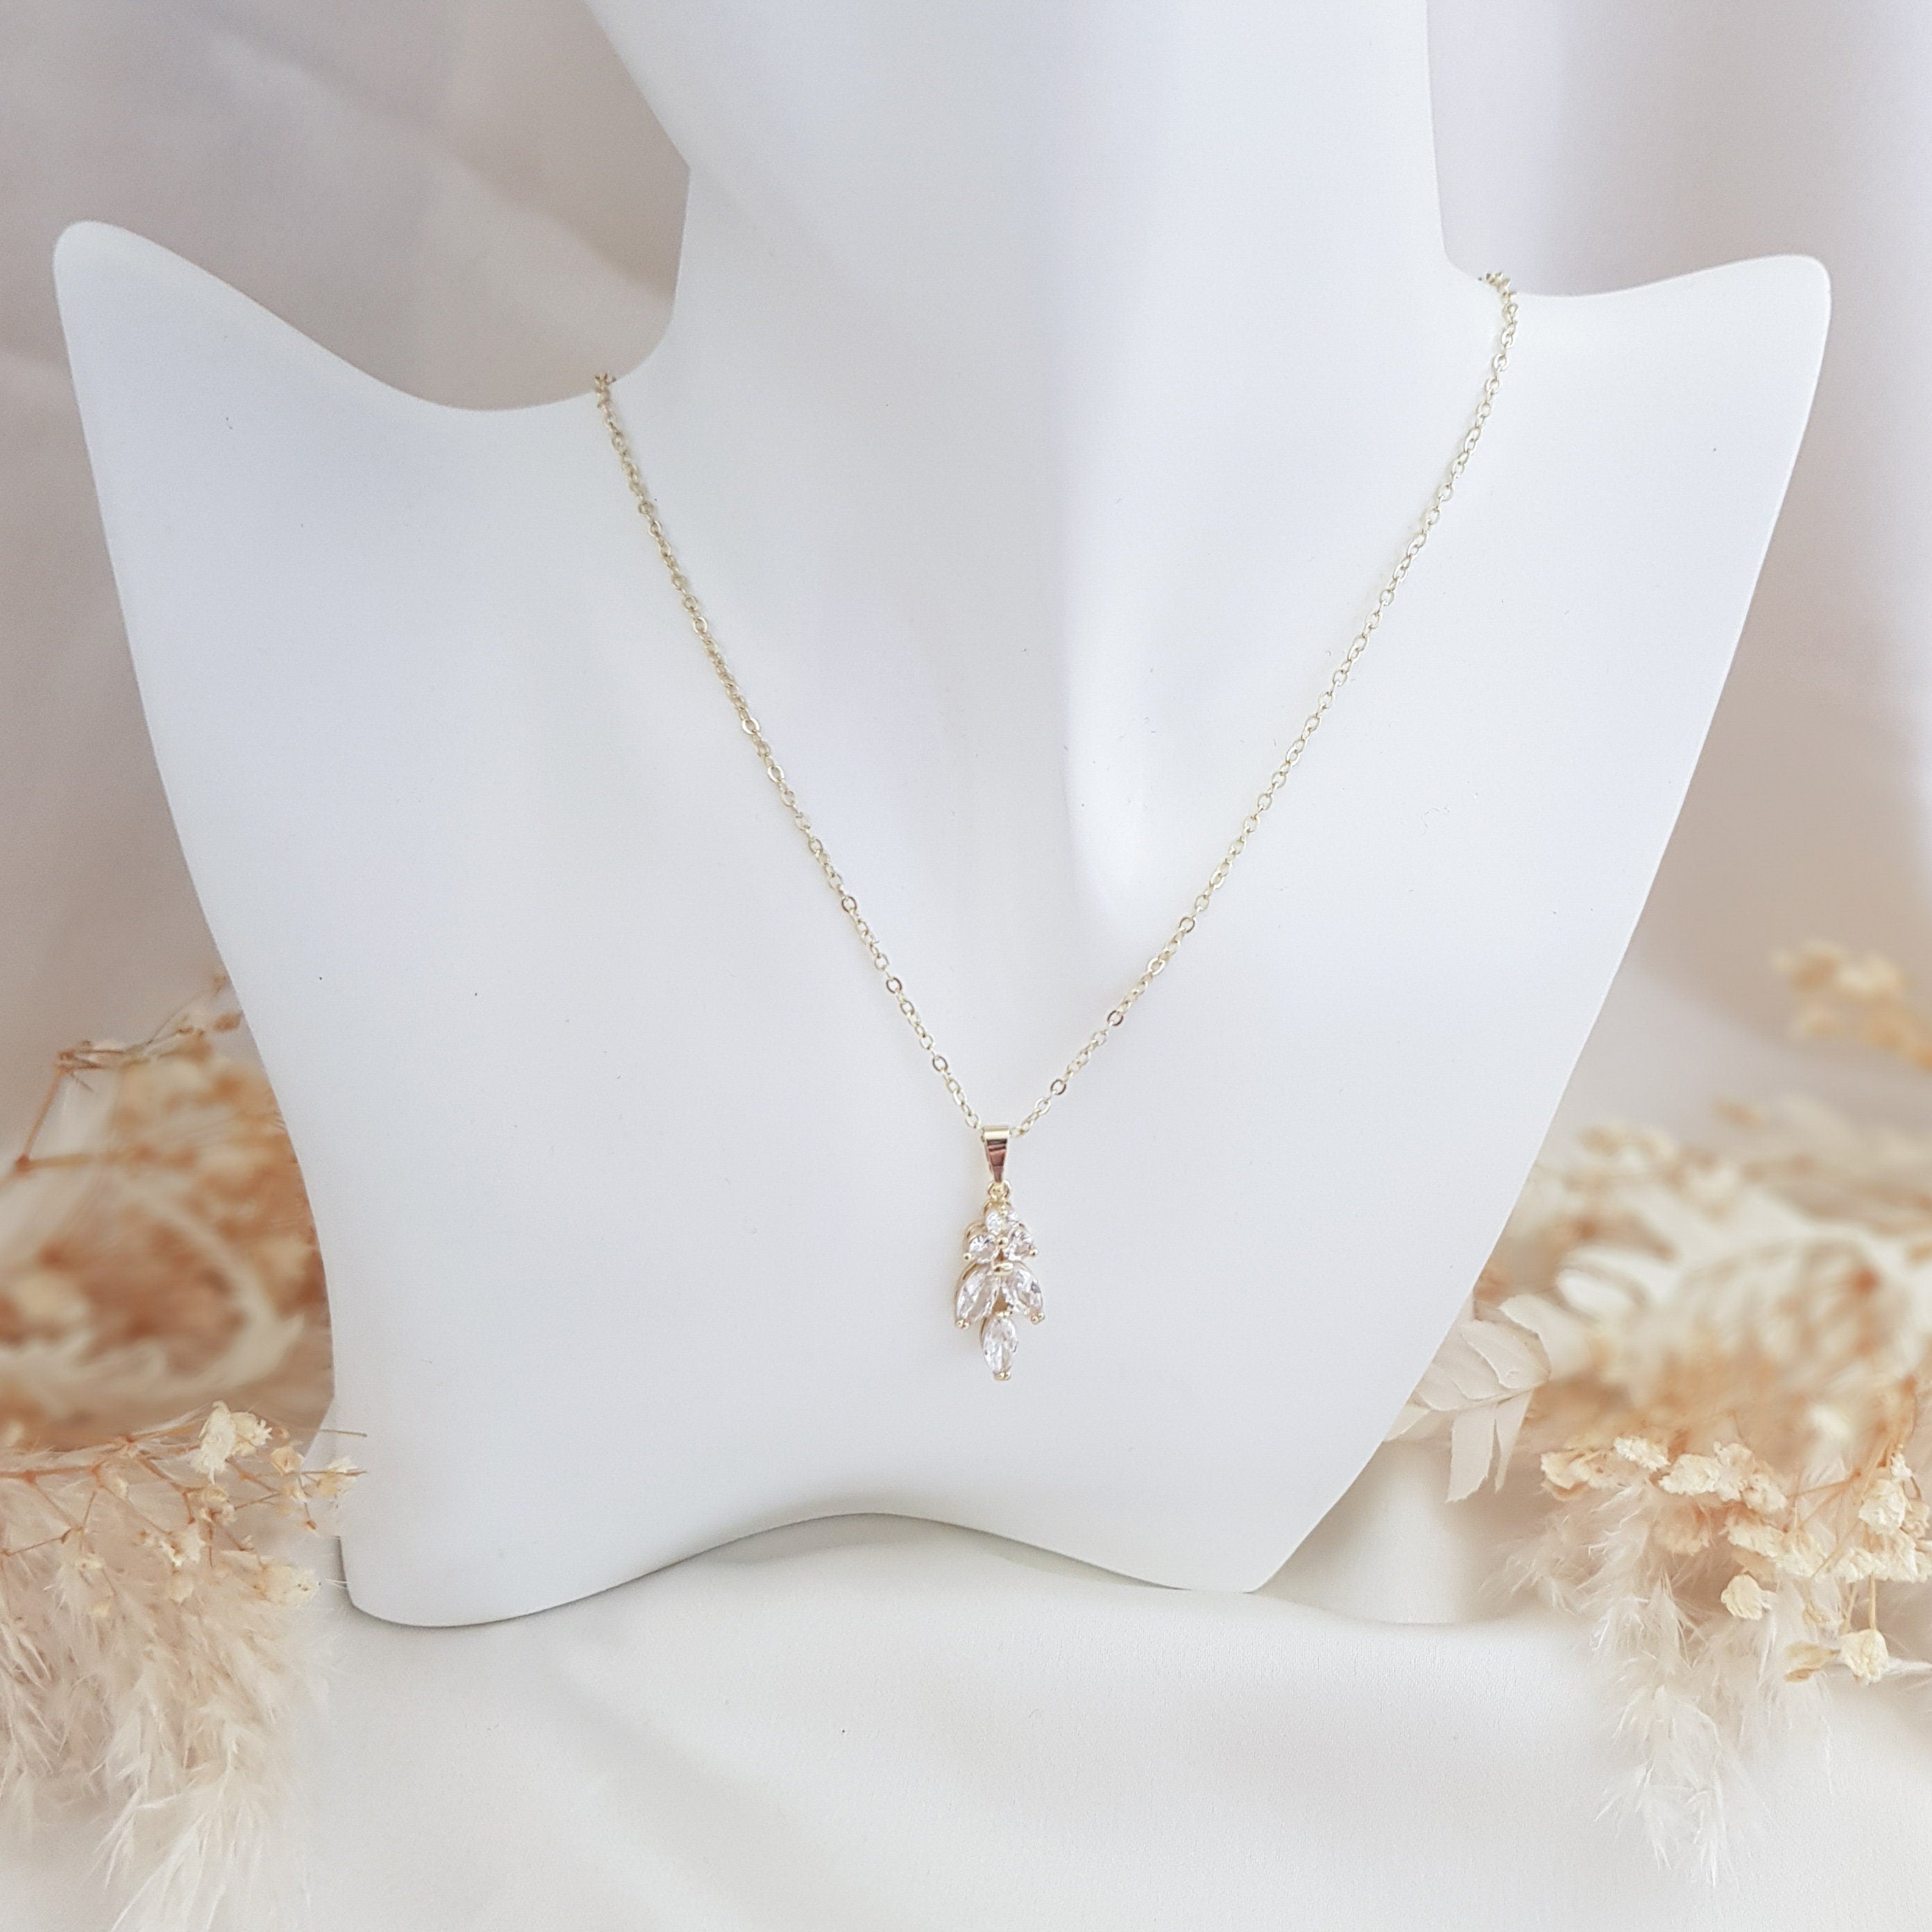 Bridal Necklace, Vintage Style Necklace, Crystal Bridal Necklace, Gold Necklace, Wedding Necklace, Bridesmaid Gift, Bridal Jewellery